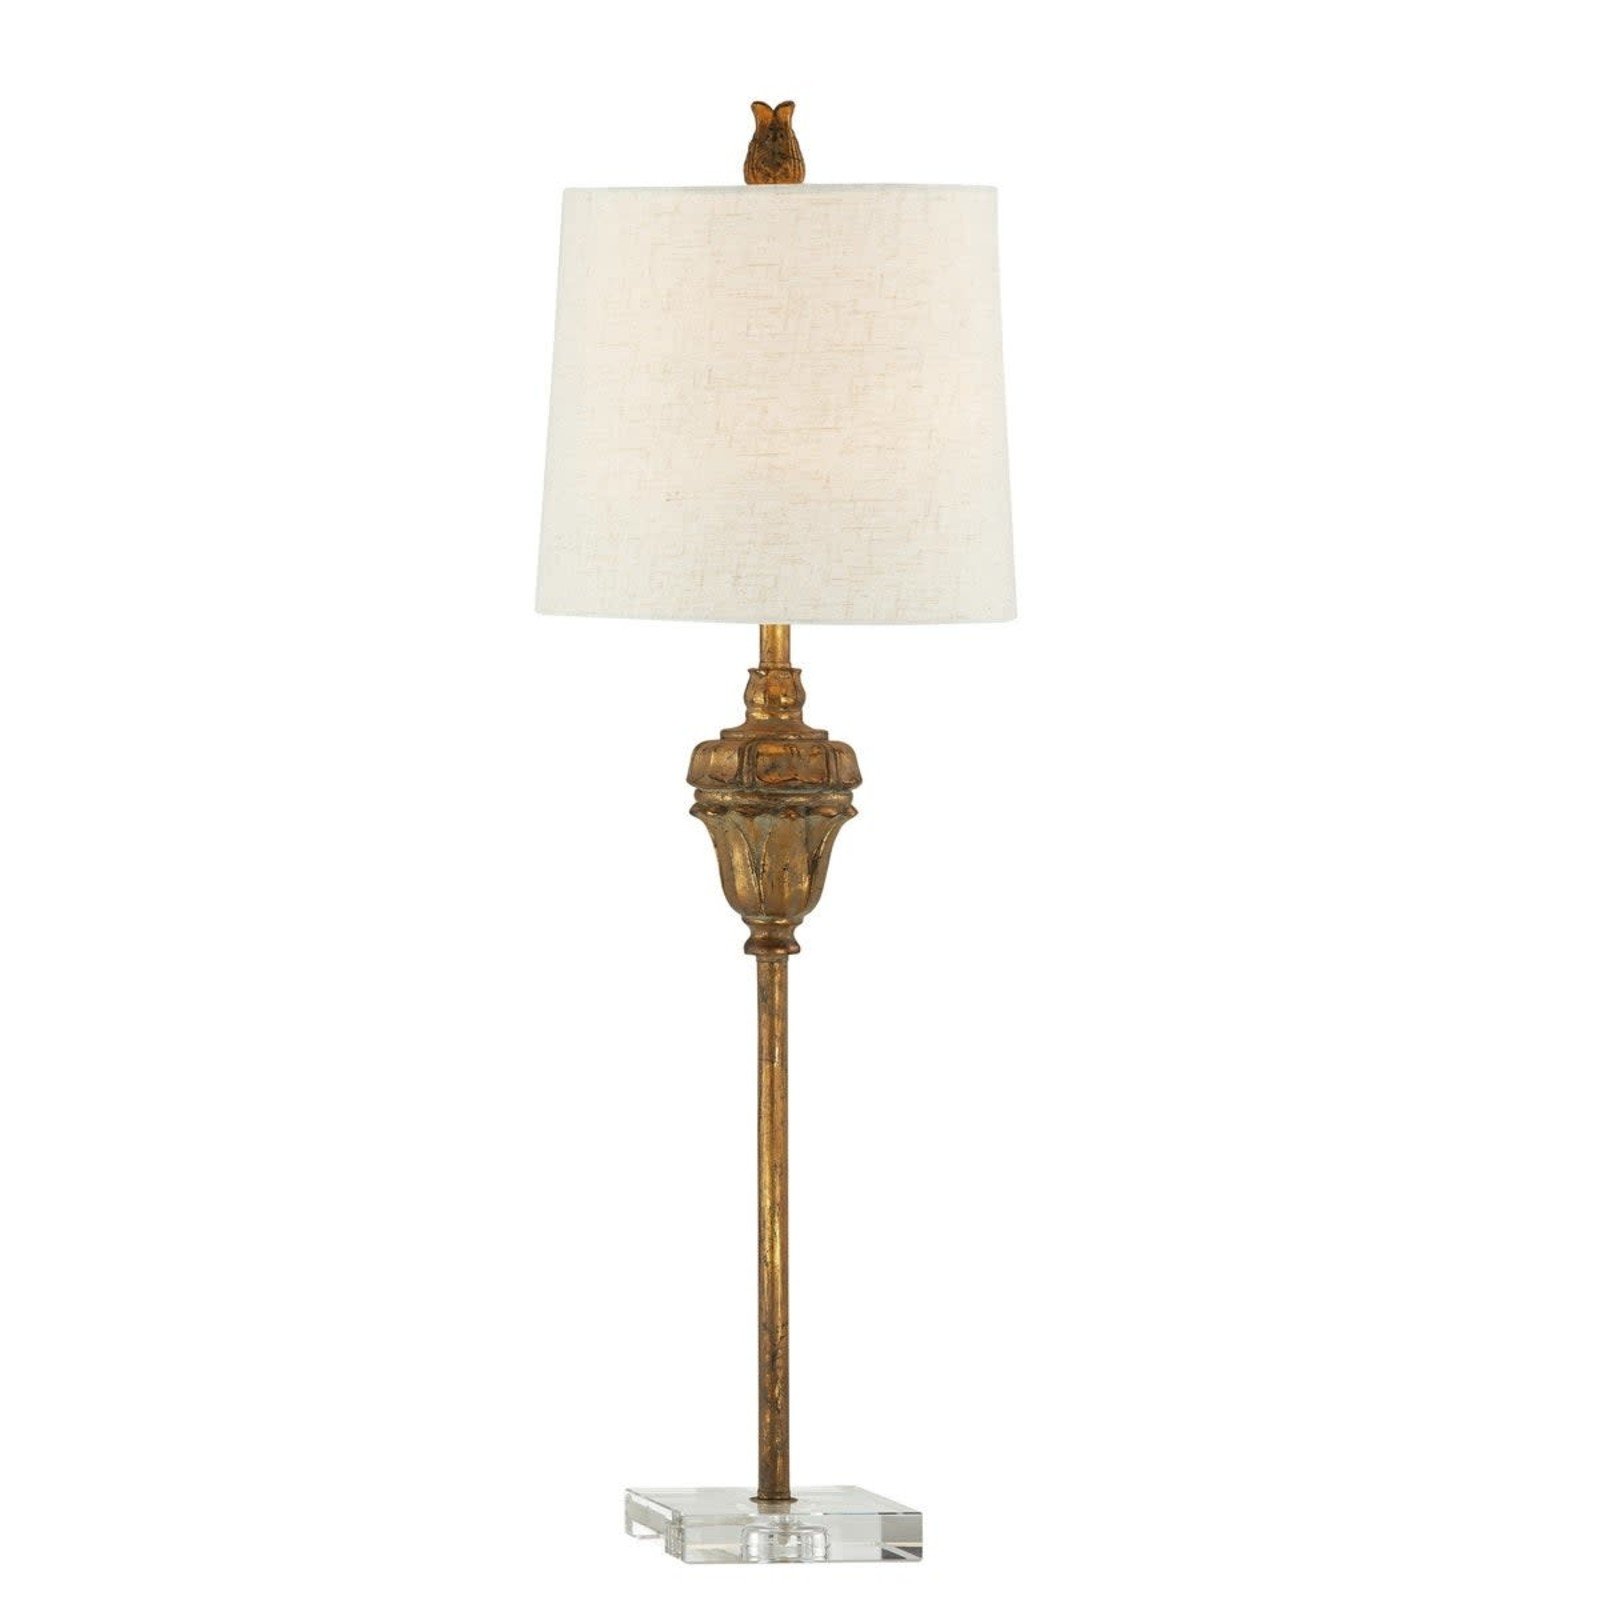 Forty West STEPHANIE BUFFET LAMP   710228 loading=